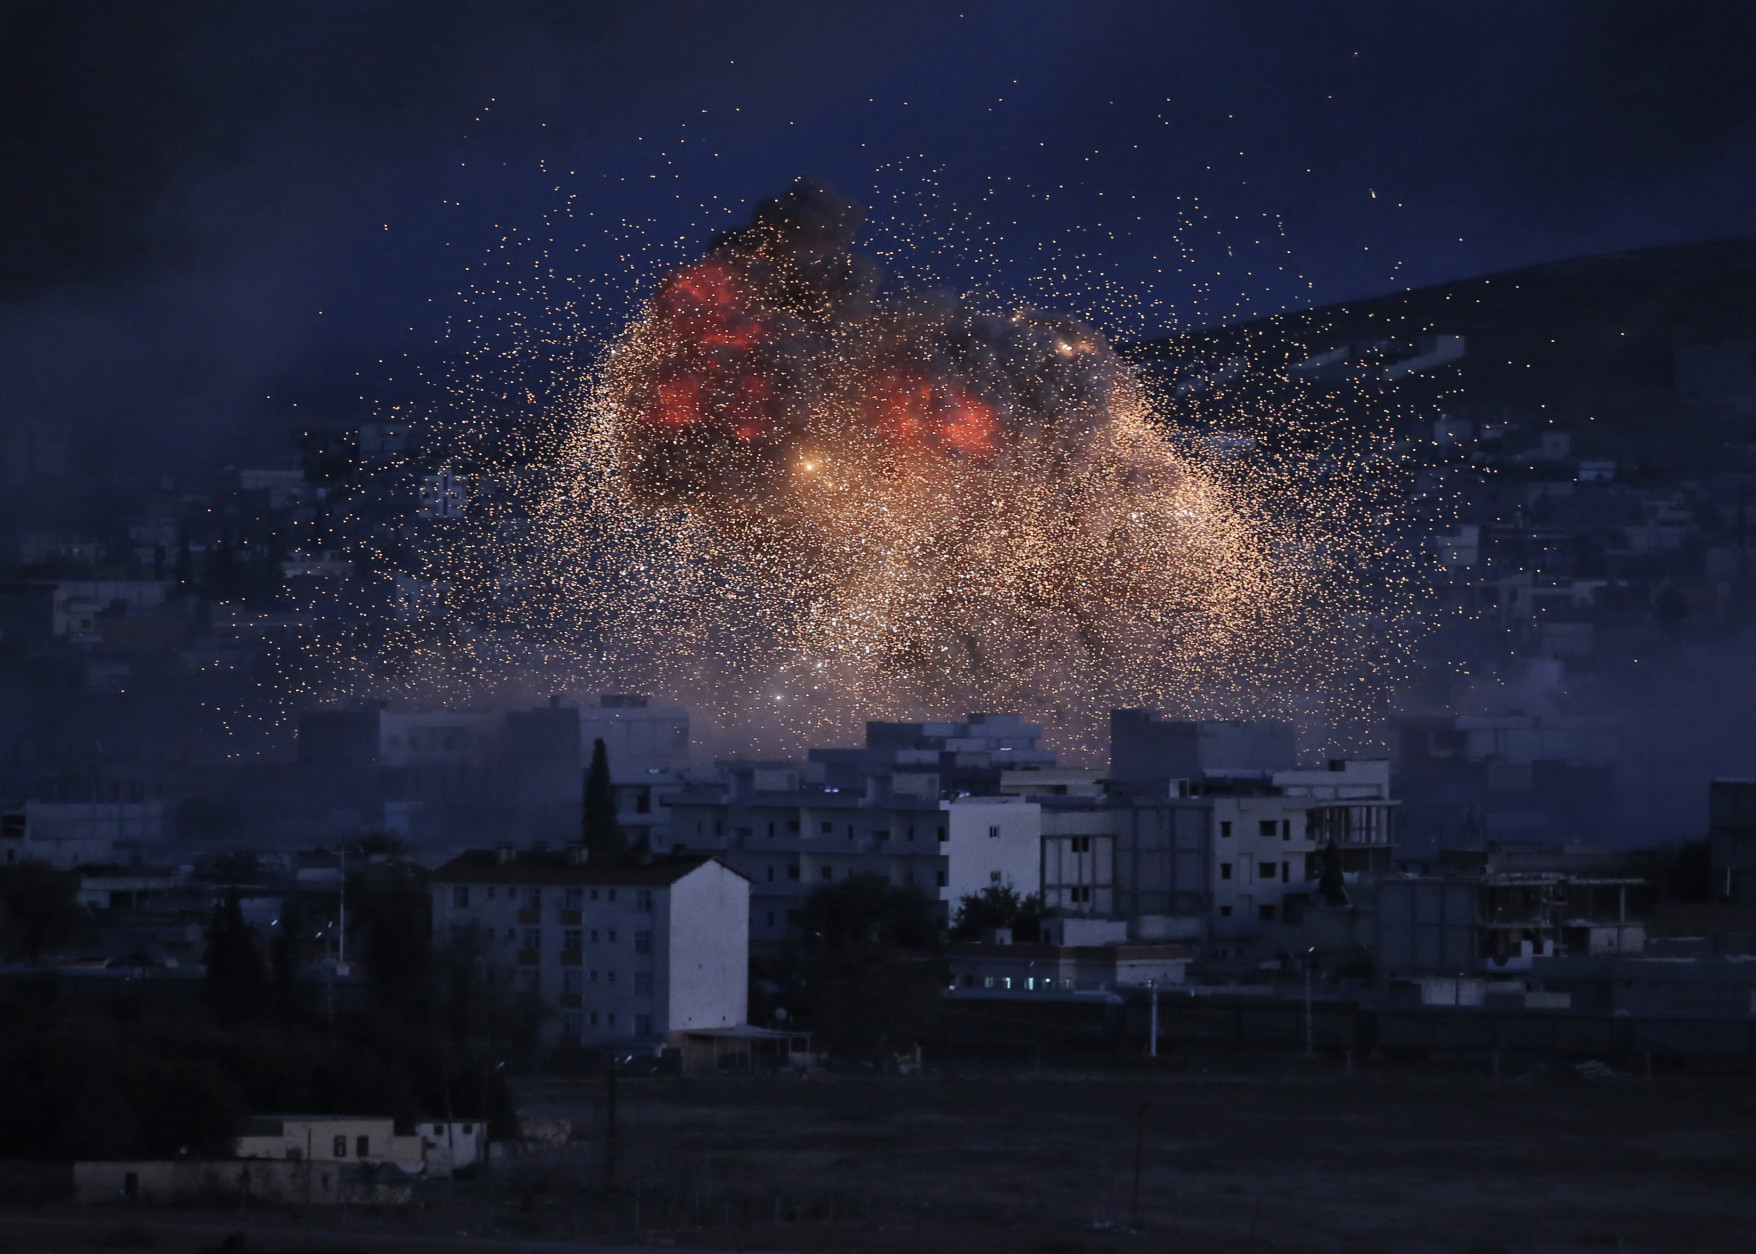 FOR USE AS DESIRED, YEAR END PHOTOS - FILE - Thick smoke and flames from an airstrike by the U.S.-led coalition rise in Kobani, Syria, as seen from a hilltop on the outskirts of Suruc, at the Turkey-Syria border, Monday, Oct. 20, 2014. Kobani, also known as Ayn Arab, and its surrounding areas, has been under assault by extremists of the Islamic State group since mid-September and is being defended by Kurdish fighters. (AP Photo/Lefteris Pitarakis, File)